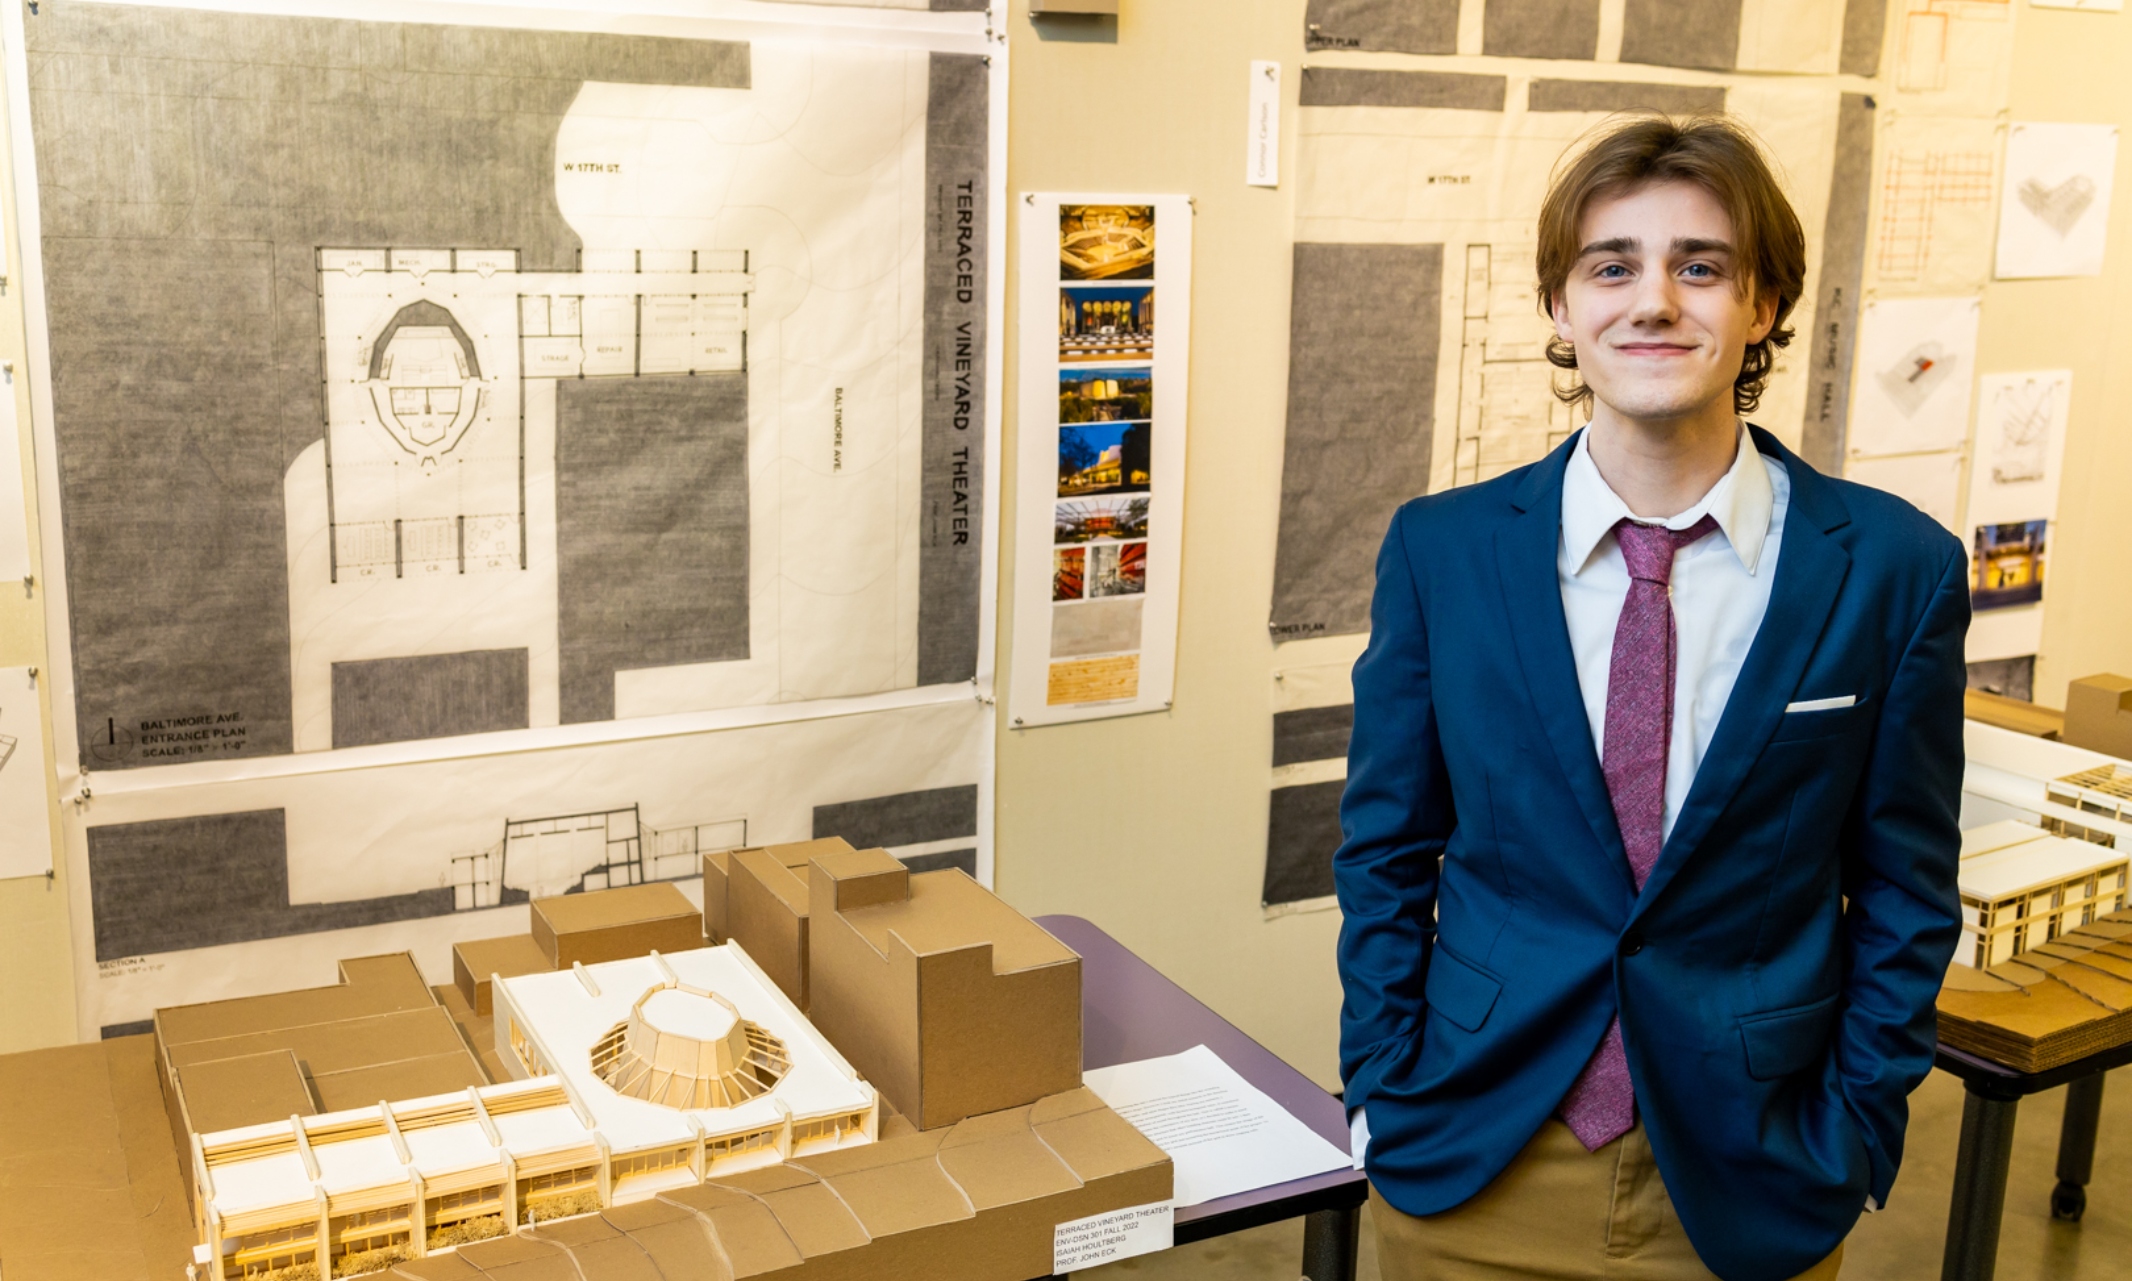 Isaiah Houltberg stands with his hands in his pockets, smiling next to his design model